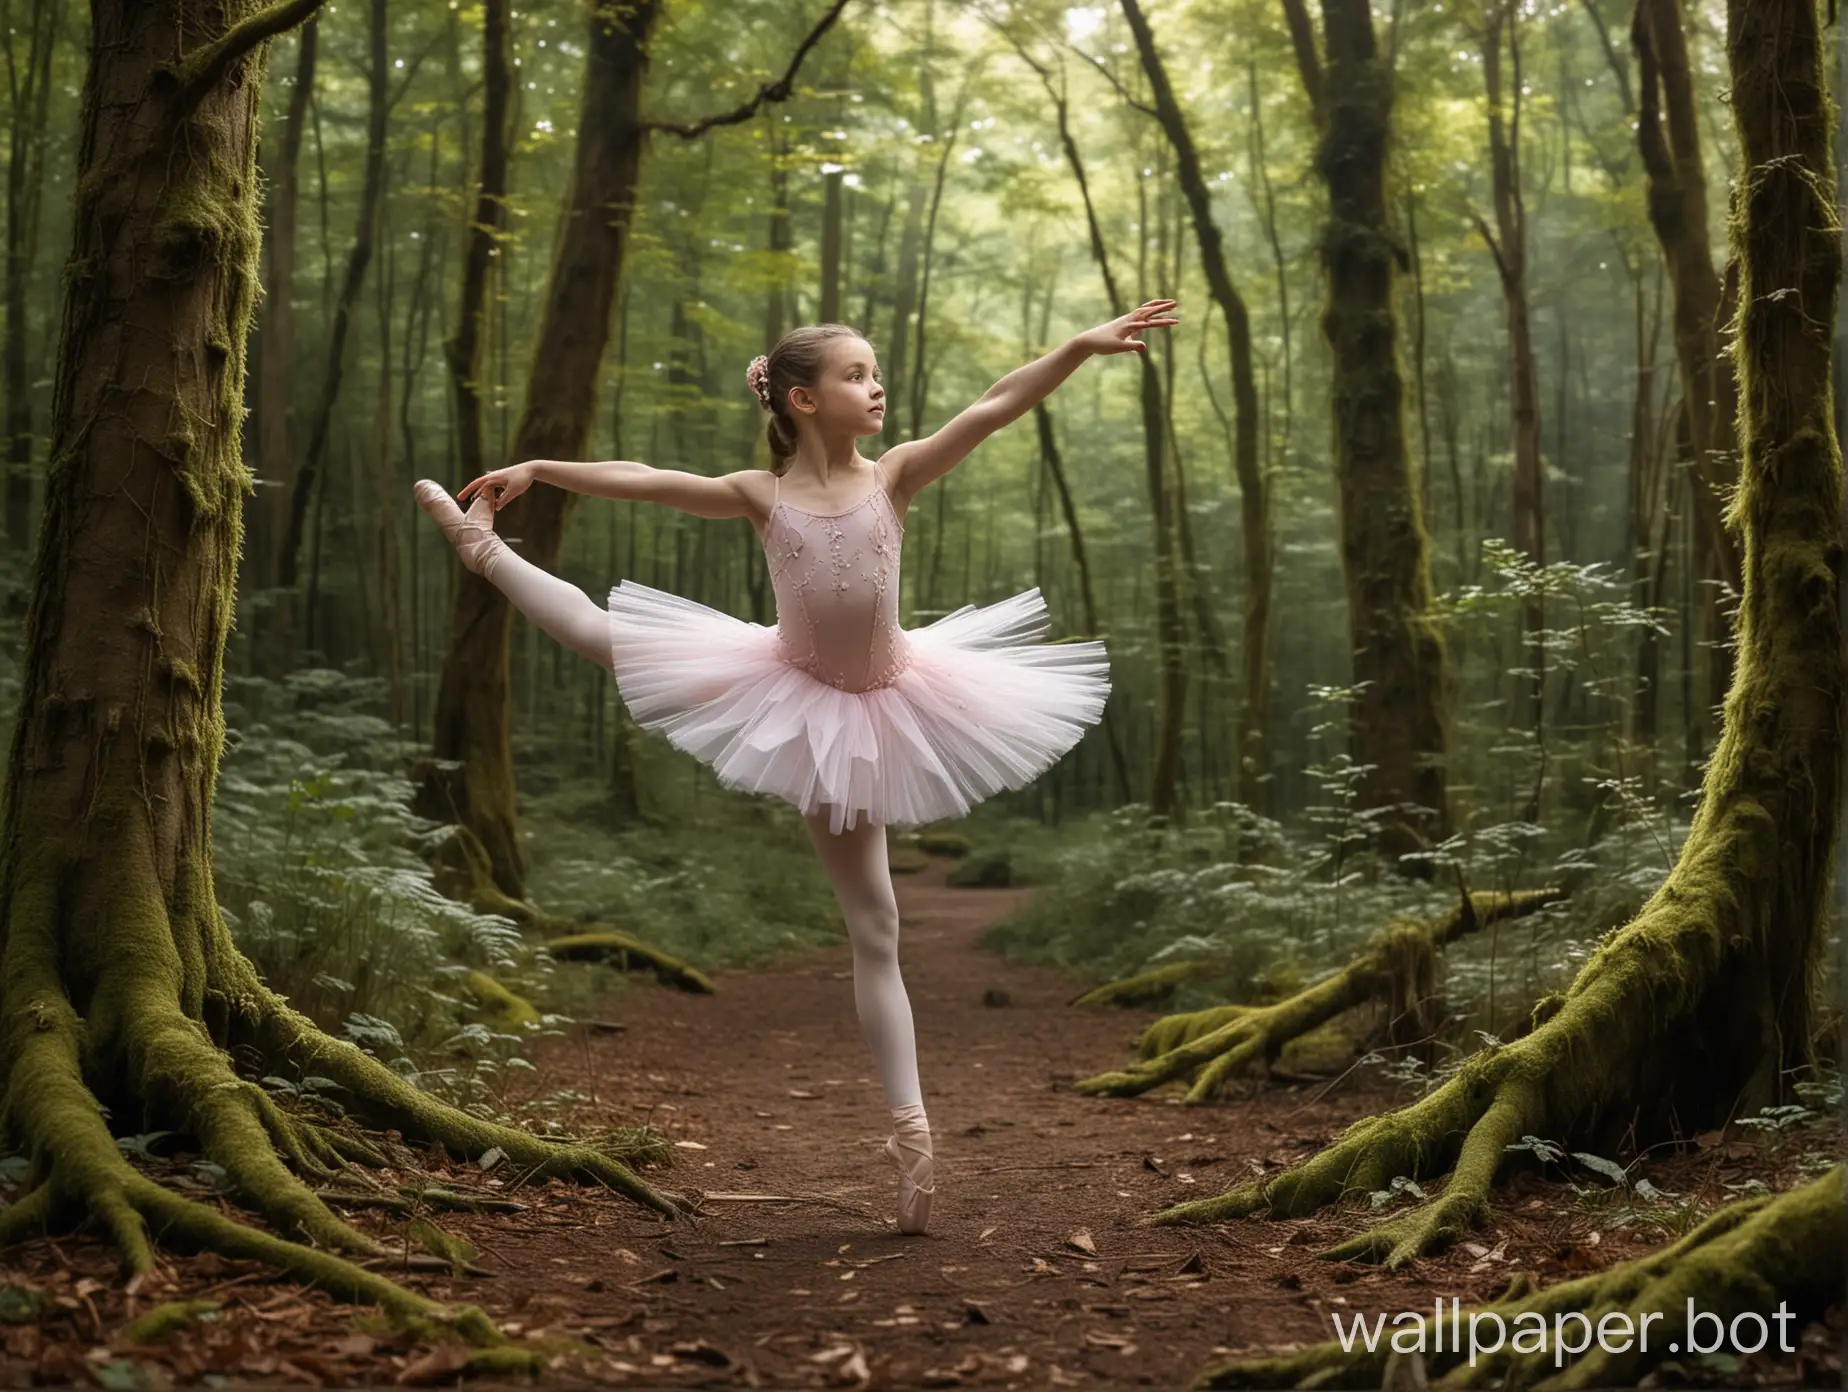 girl, aged 10, performing ballet in a forest setting surrounded by mythical creatures